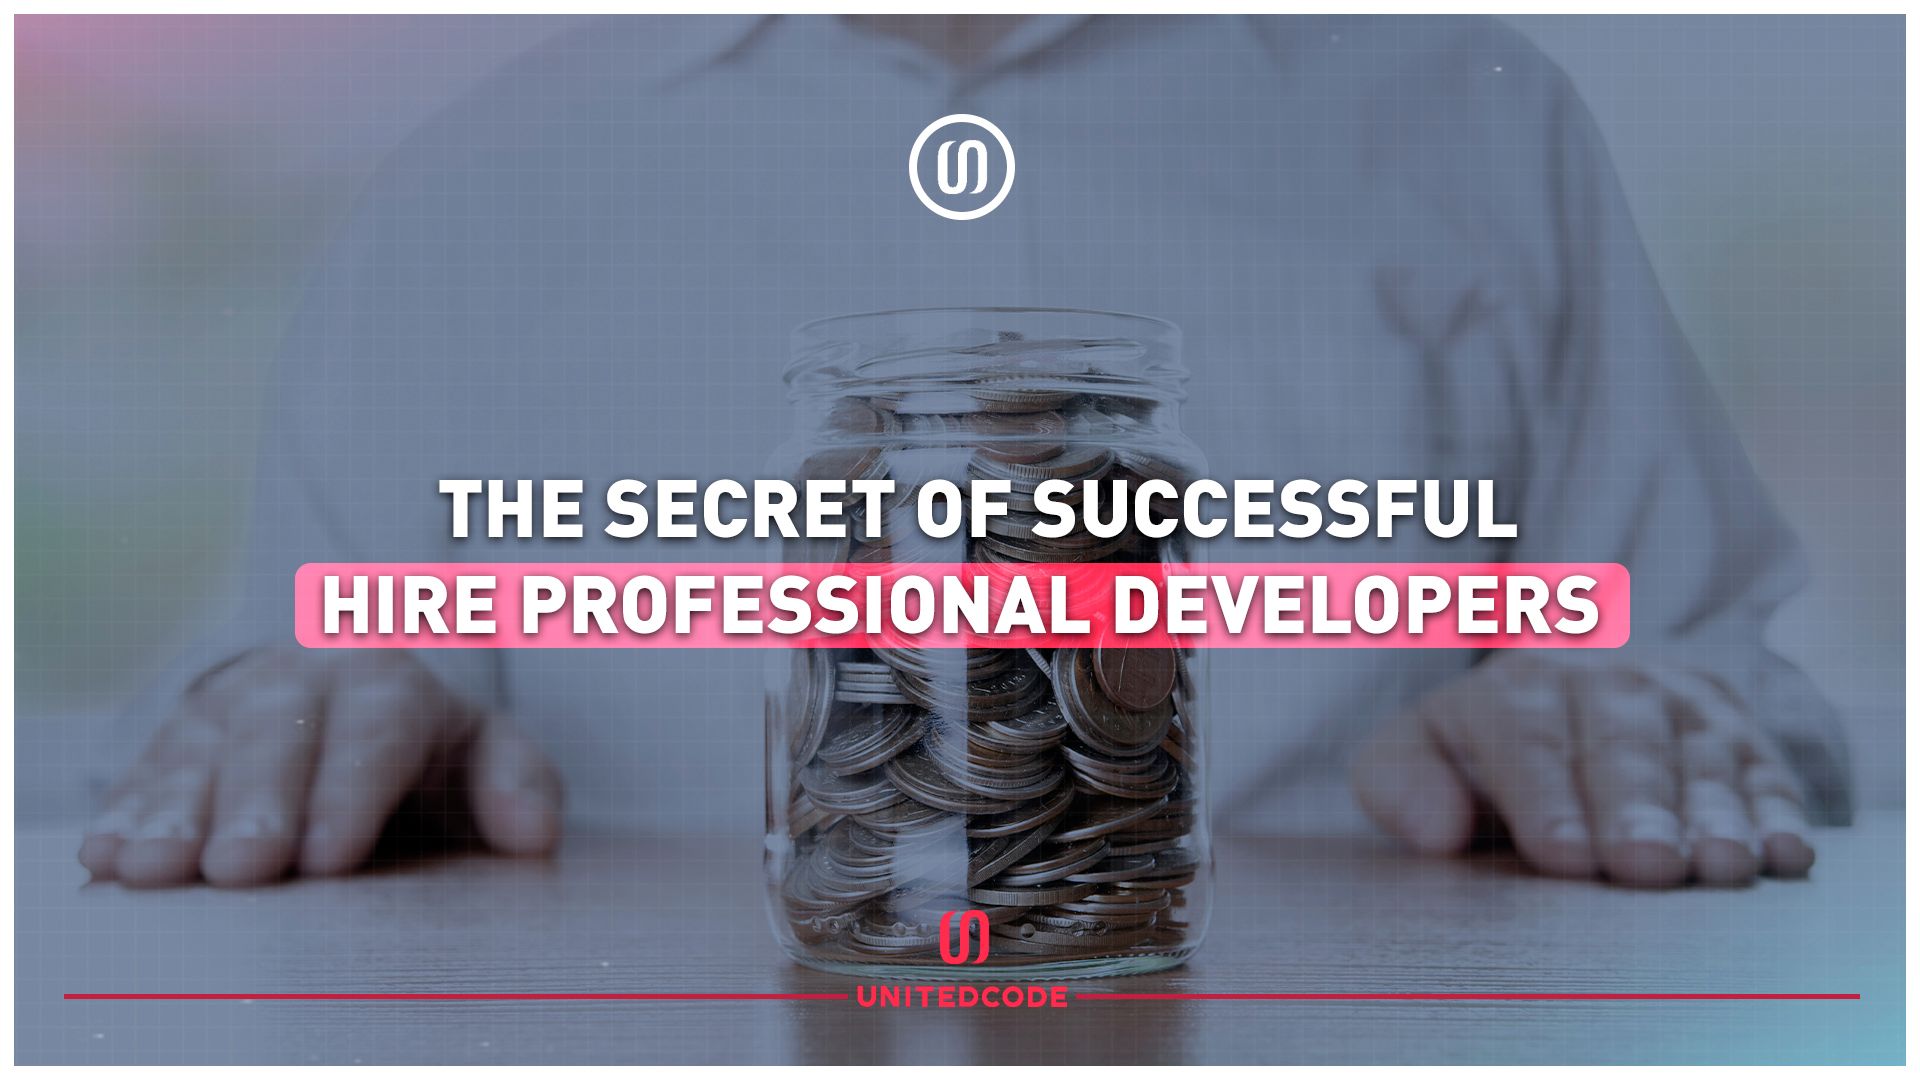 The Secret of Successful Hire Professional Developers